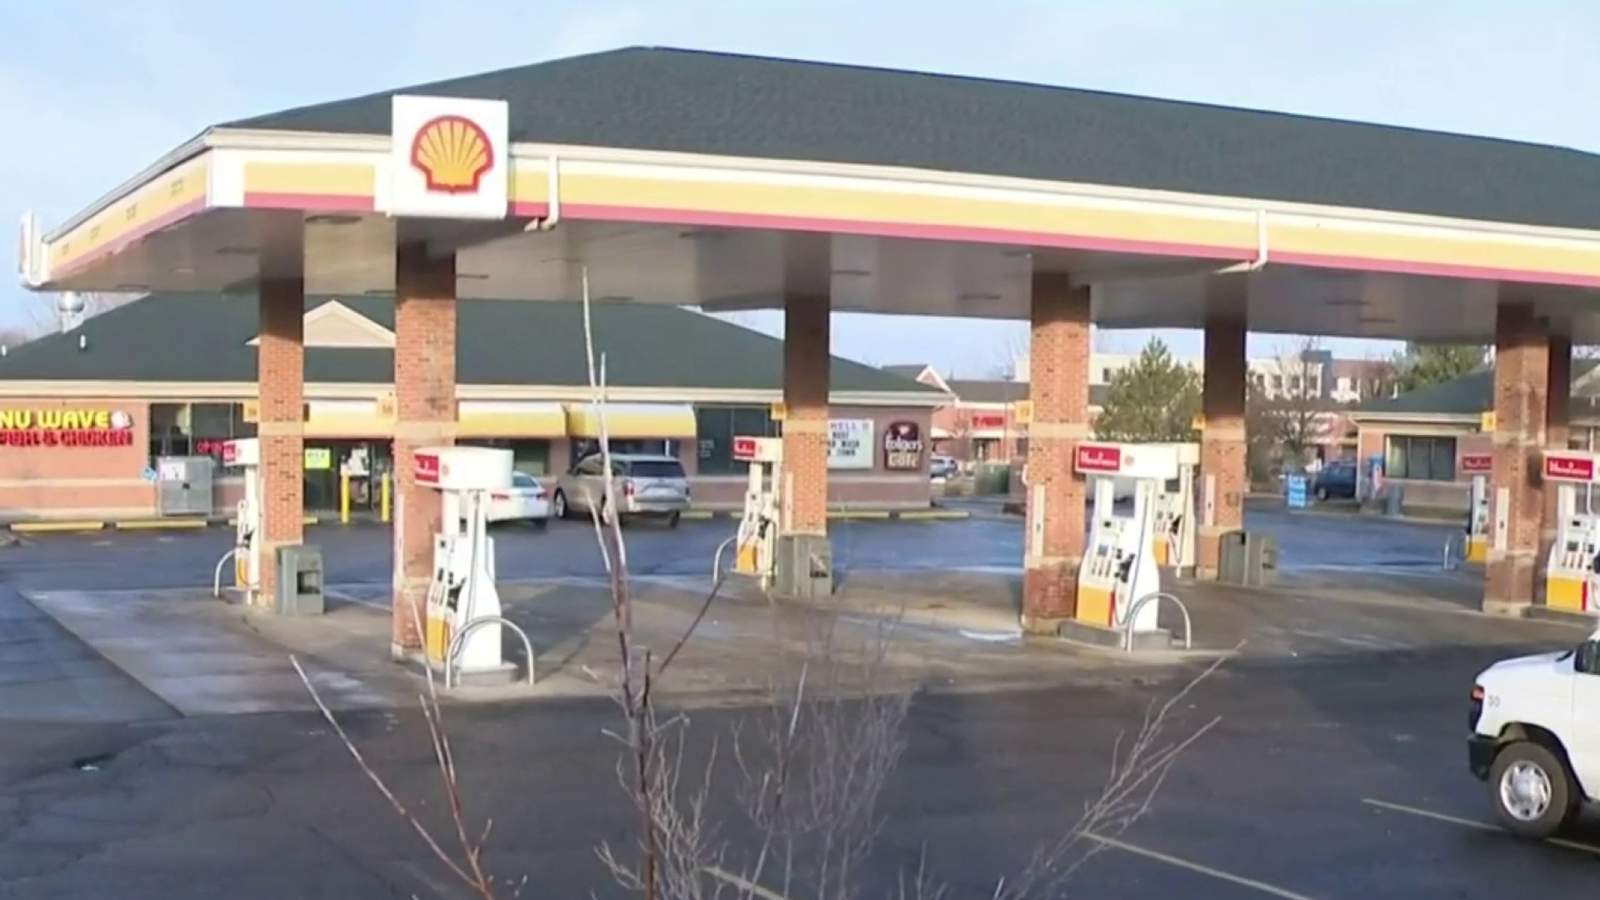 $1 million Powerball lottery ticket sold at Ypsilanti gas station